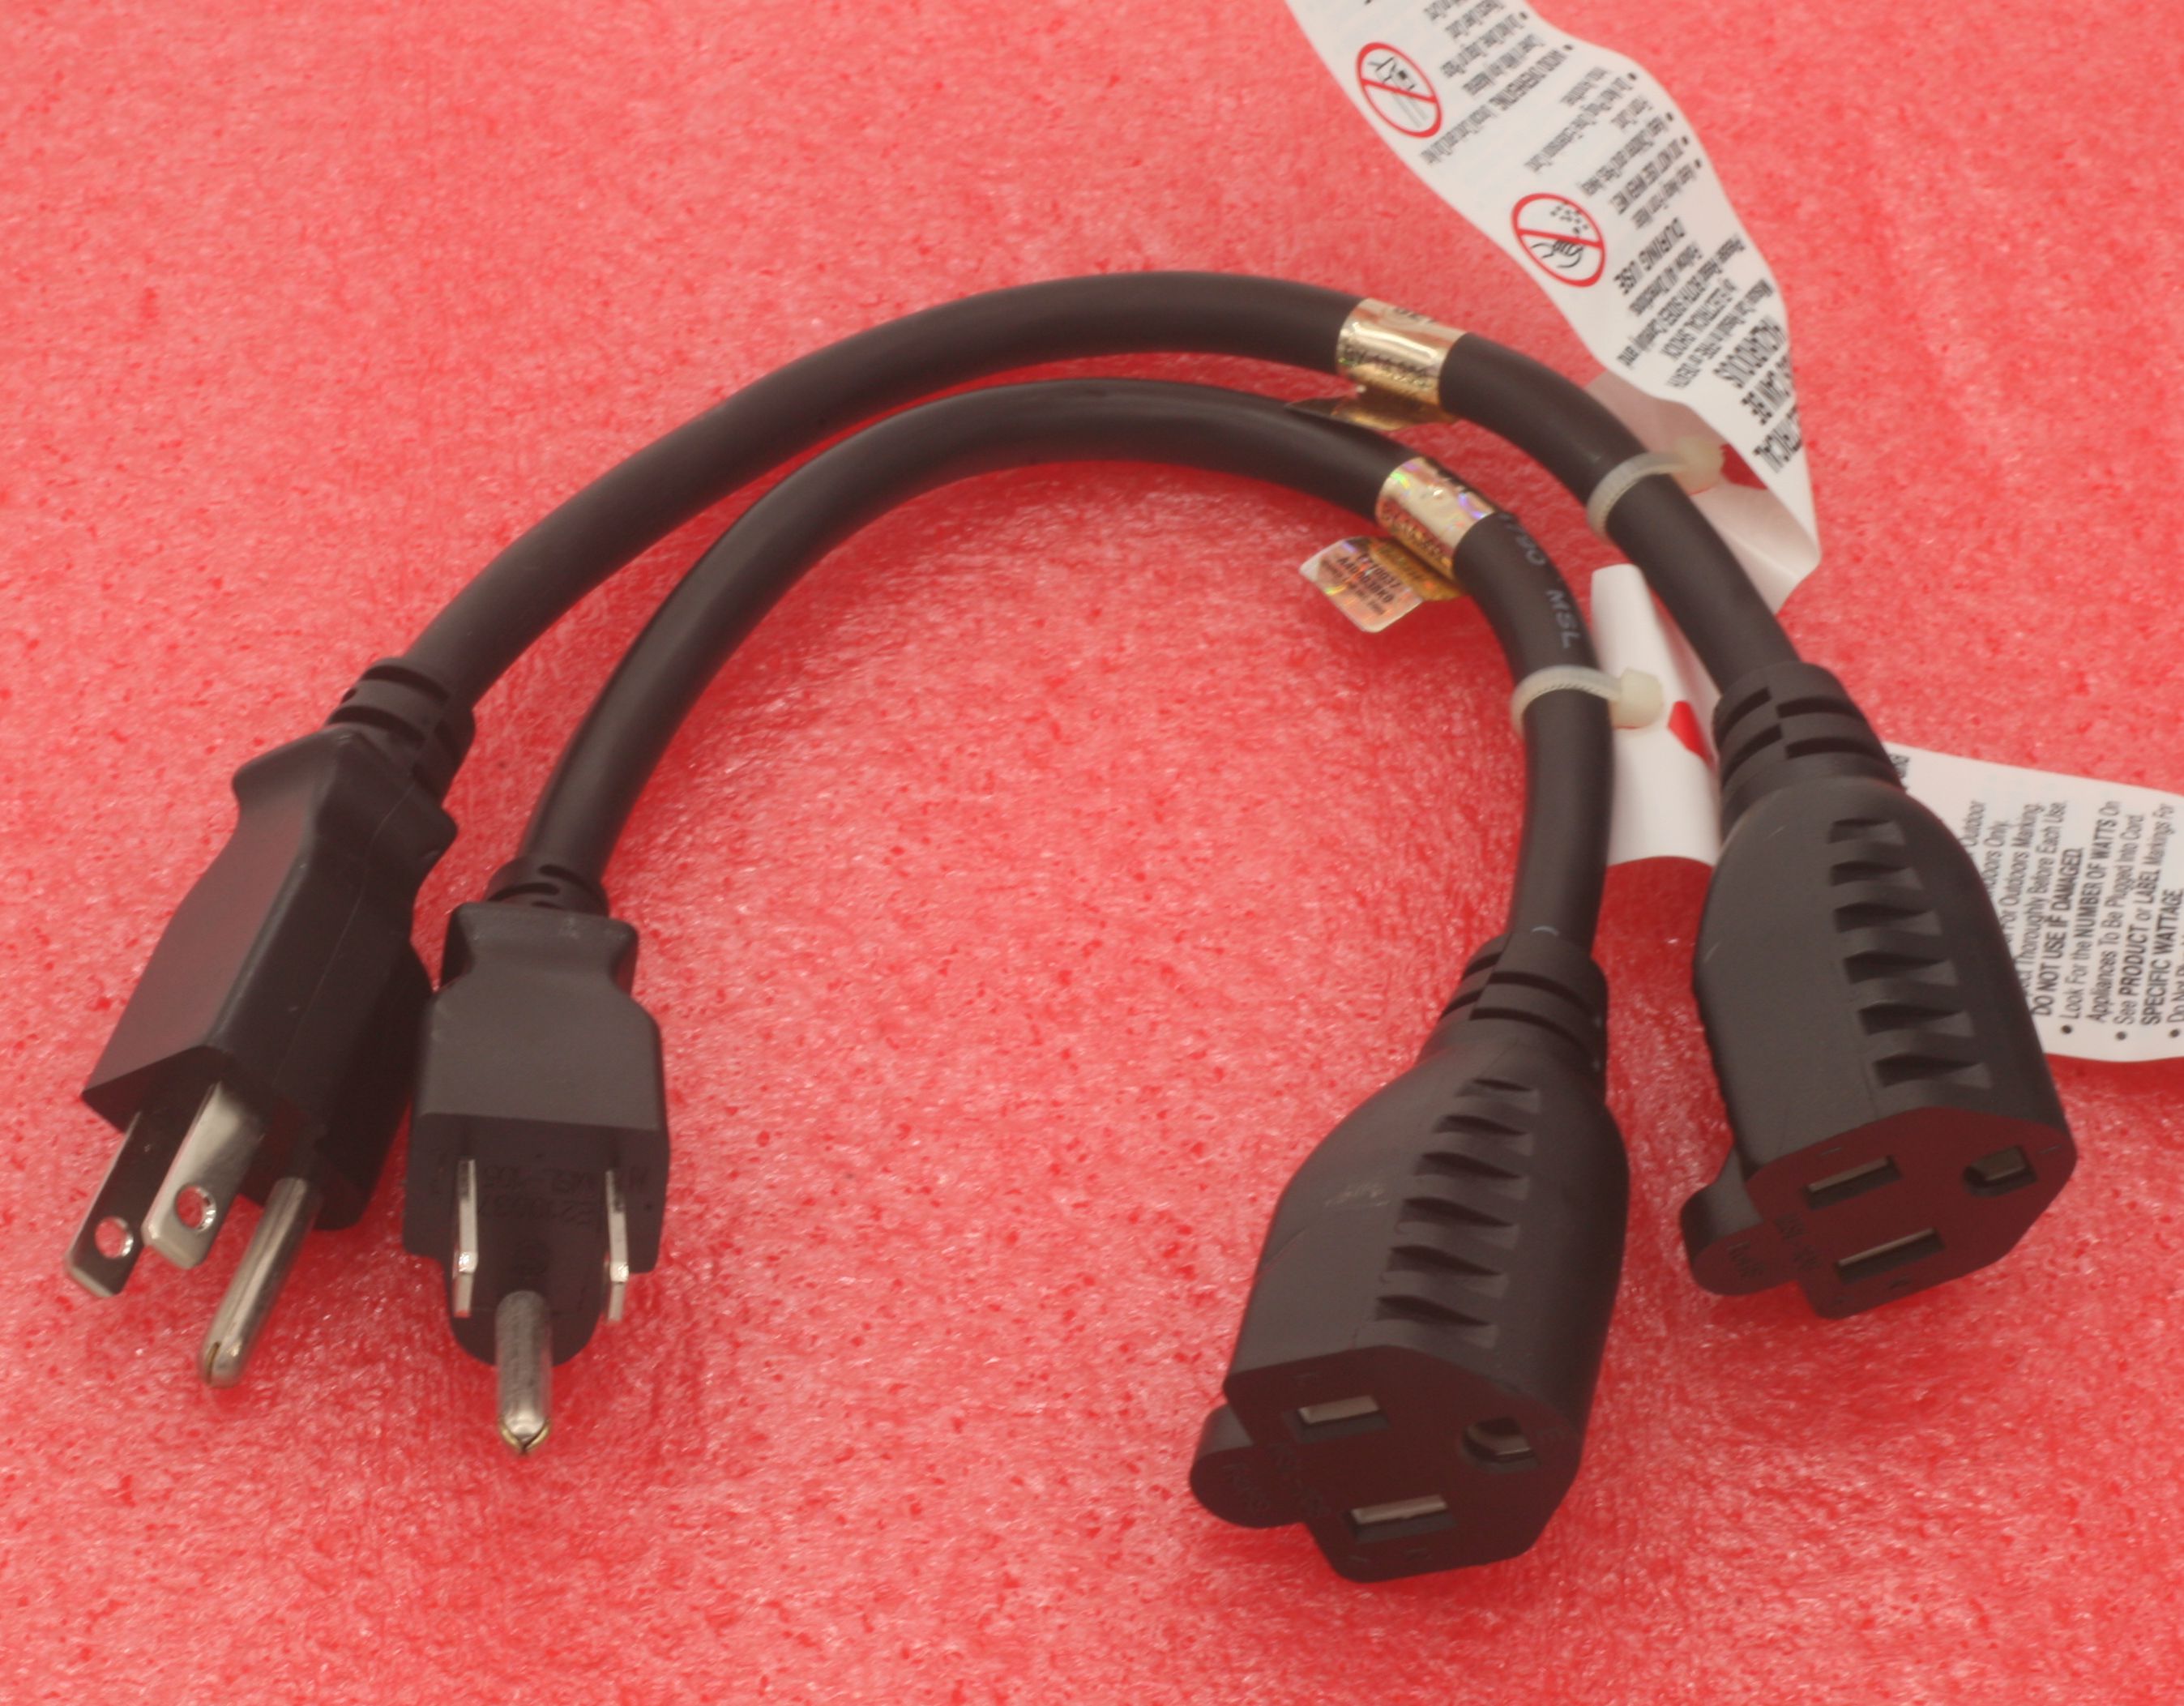 1 FT 16 AWG Heavy-Duty AC Power Extension Cord UL Approved in Black (2-Pack)